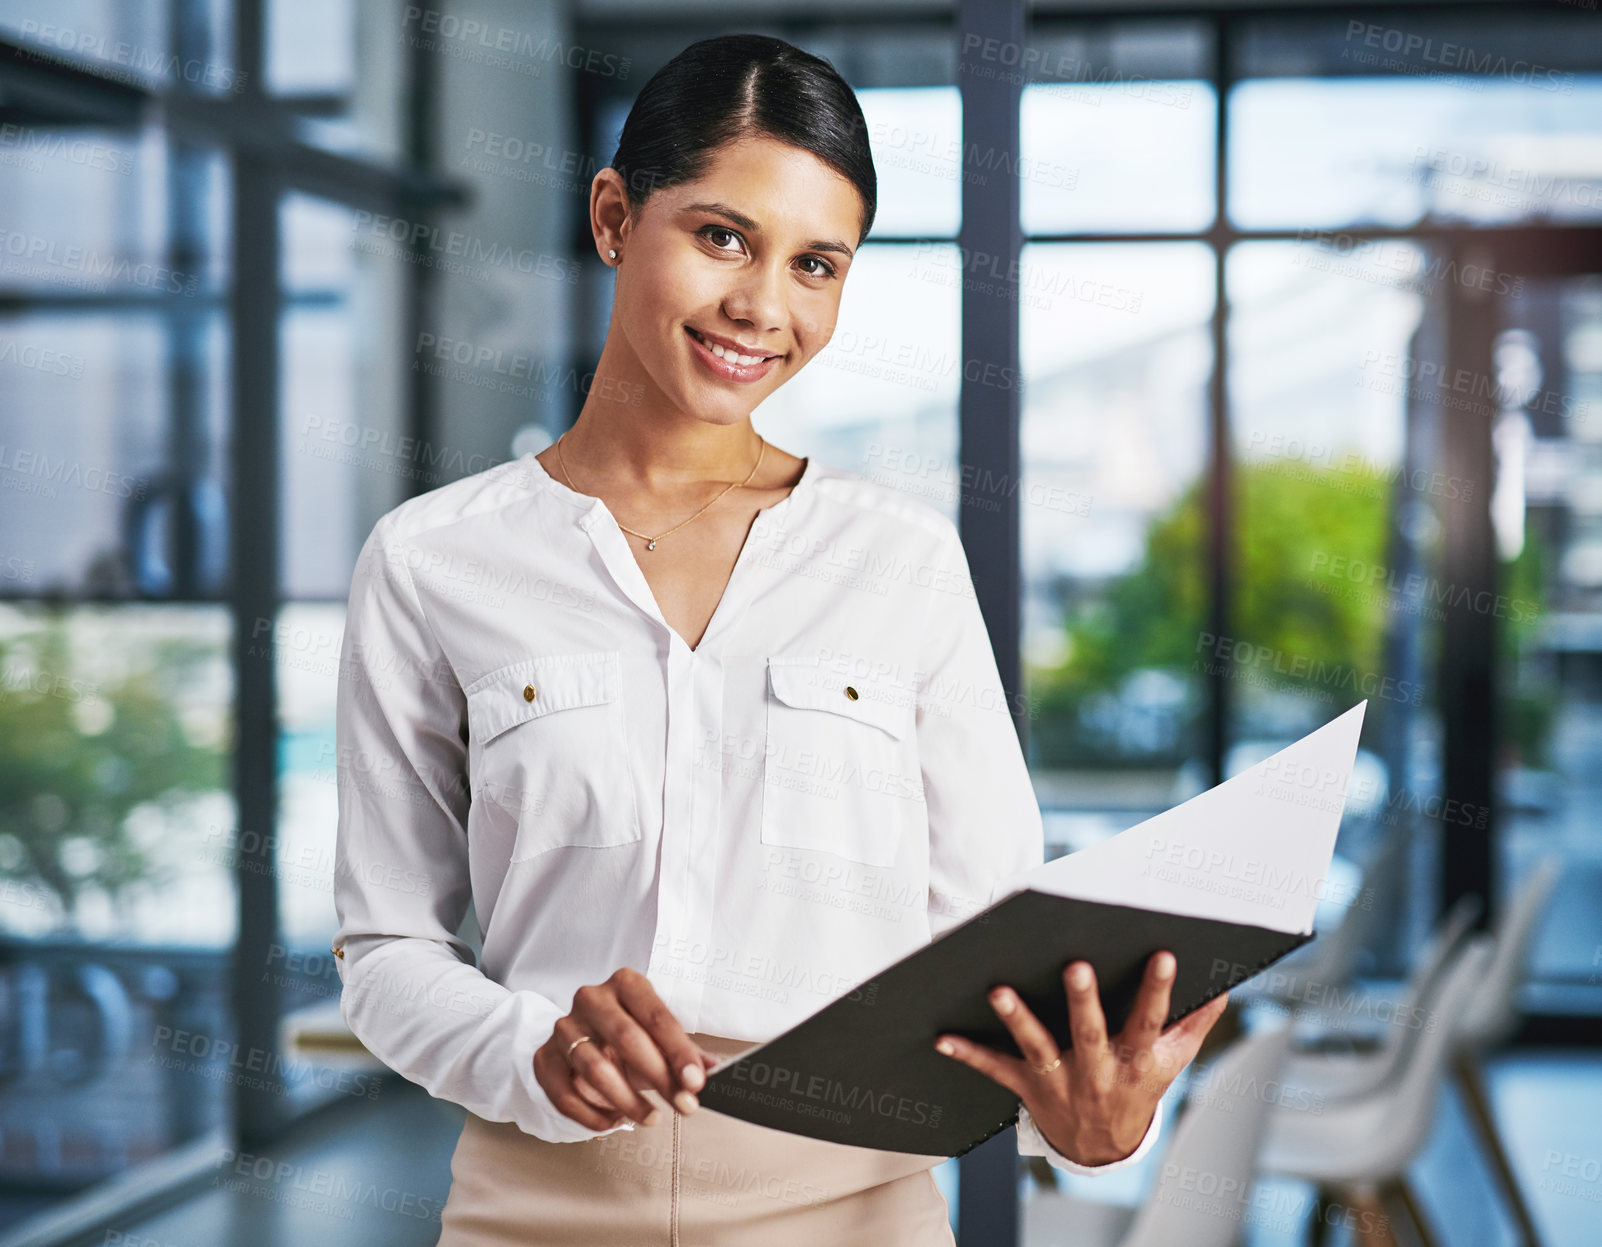 Buy stock photo Cropped portrait of an attractive young businesswoman smiling while holding a file in a modern office